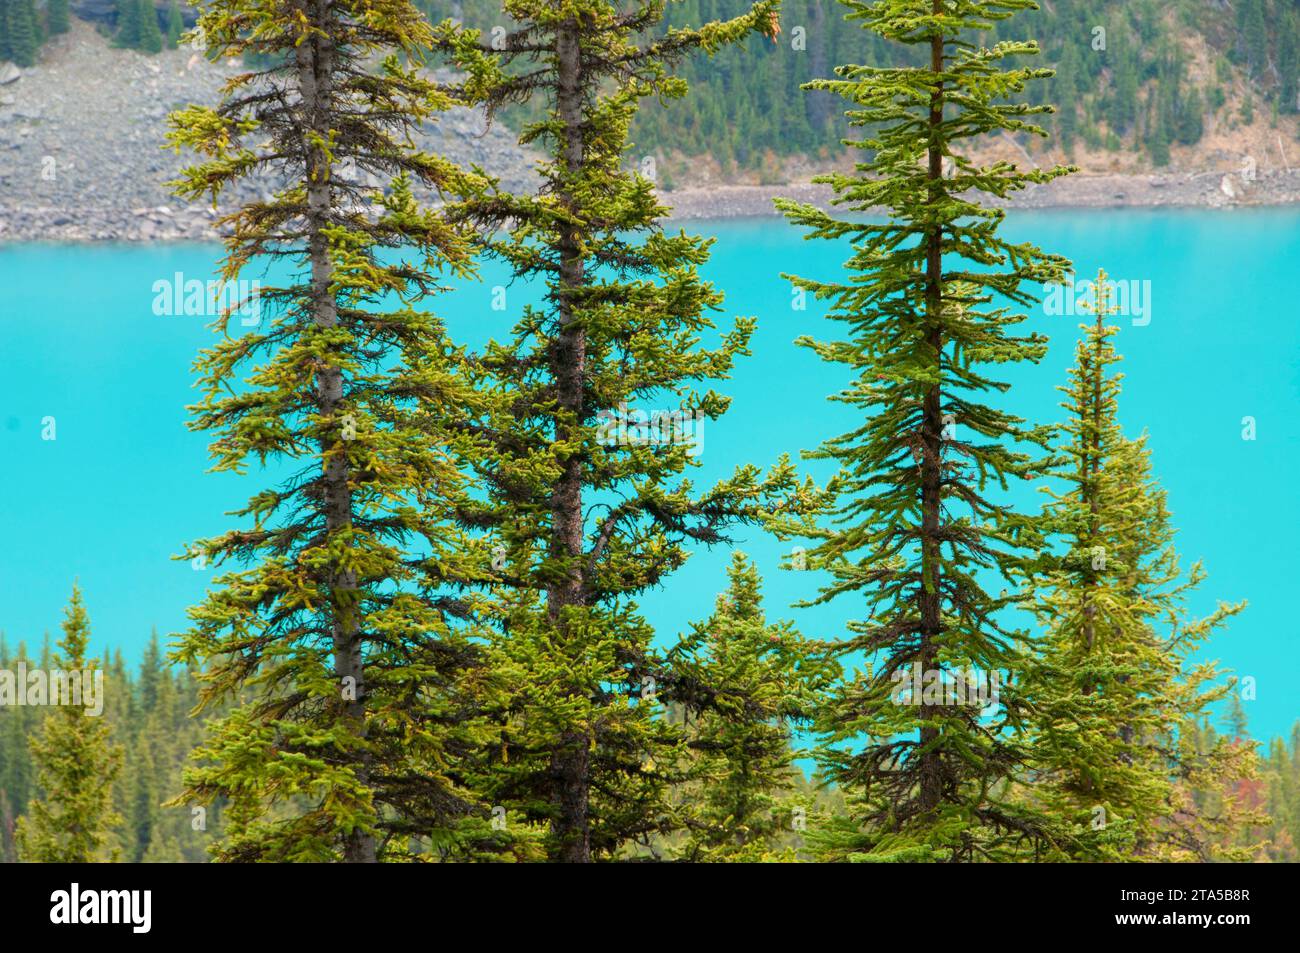 Moraine Lake from Larch Valley Trail, Banff National Park, Alberta, Canada Stock Photo